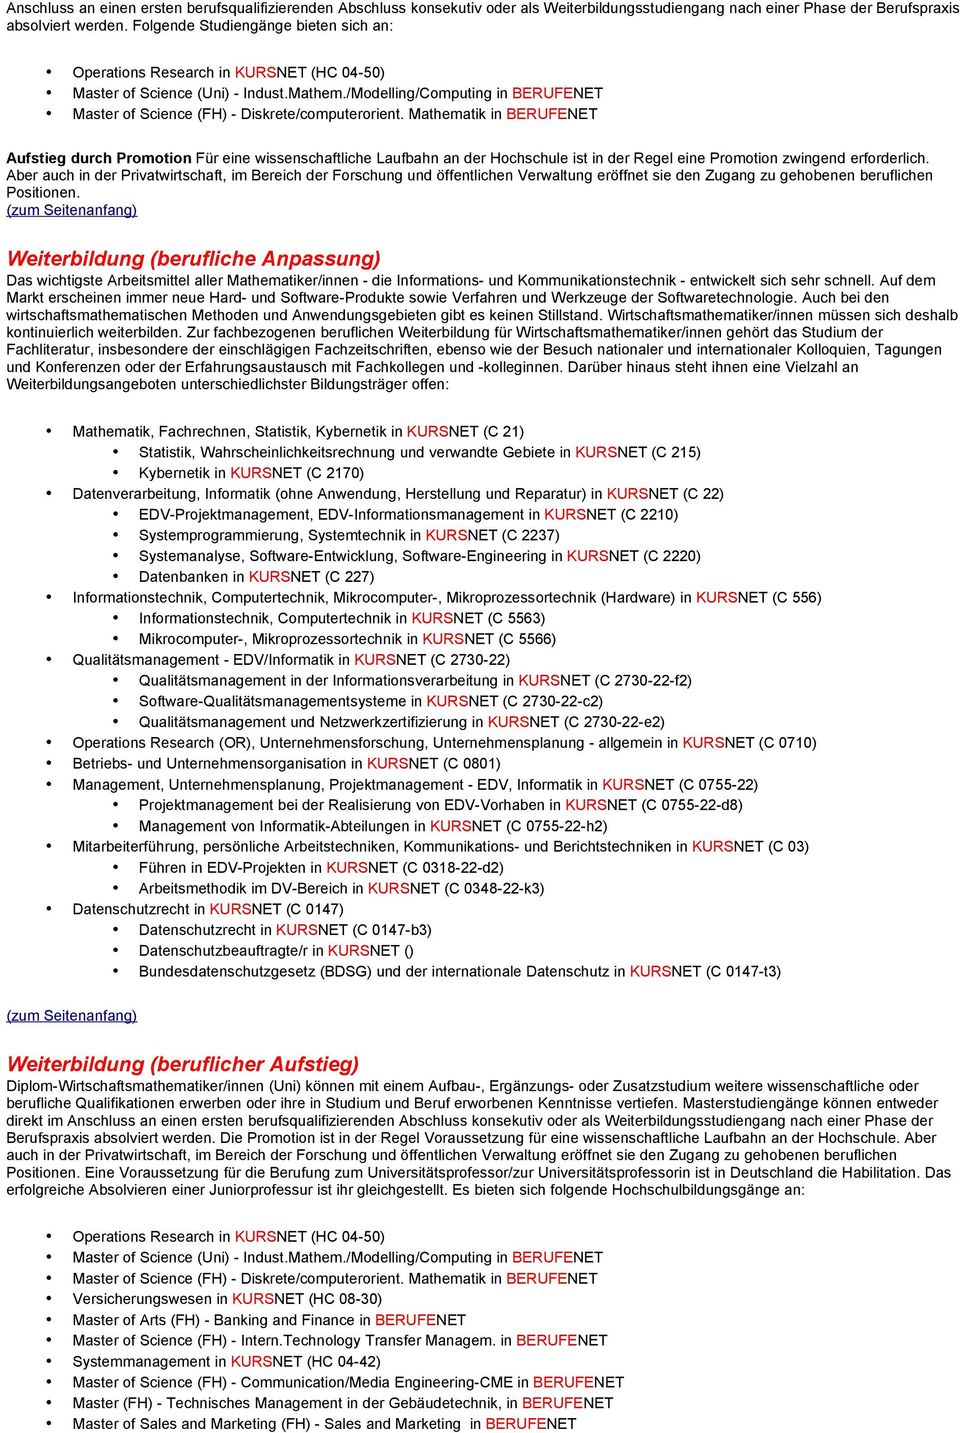 /Modelling/Computing in BERUFENET Master of Science (FH) - Diskrete/computerorient.